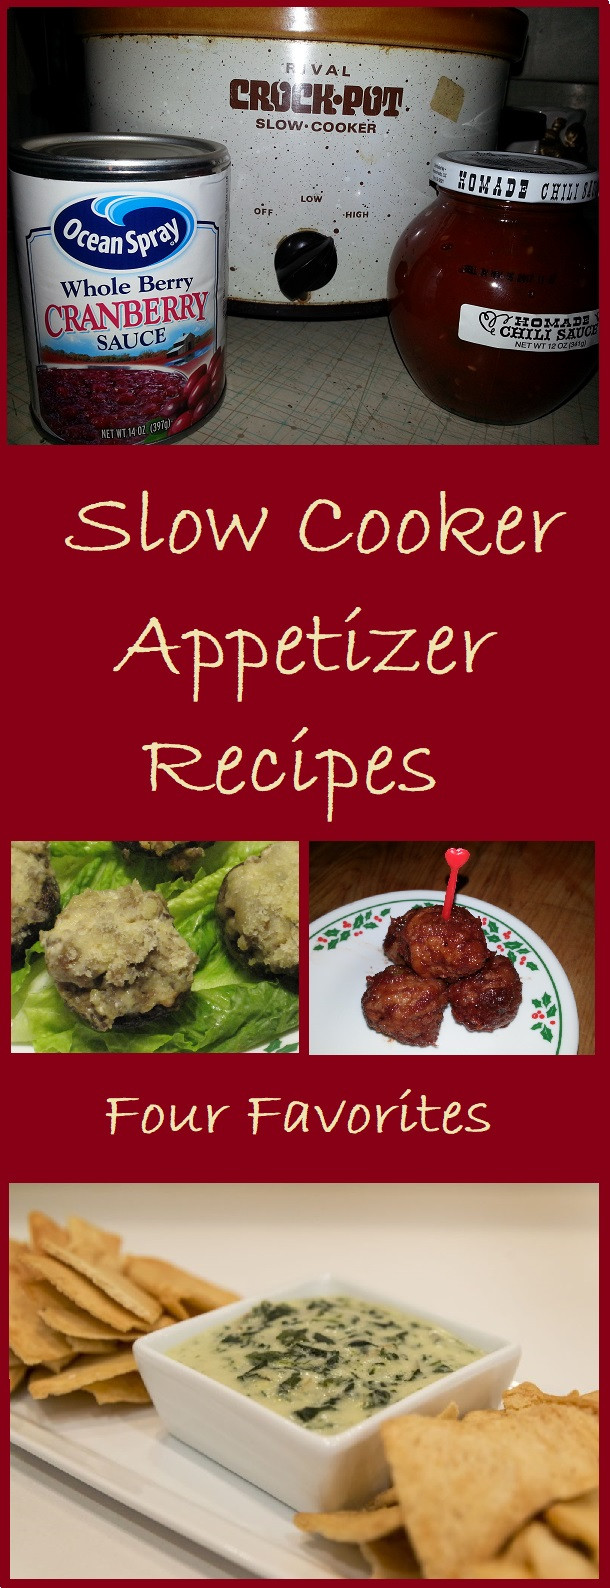 14 Easy Slow Cooker Appetizers
 Slow Cooker Appetizer Recipes